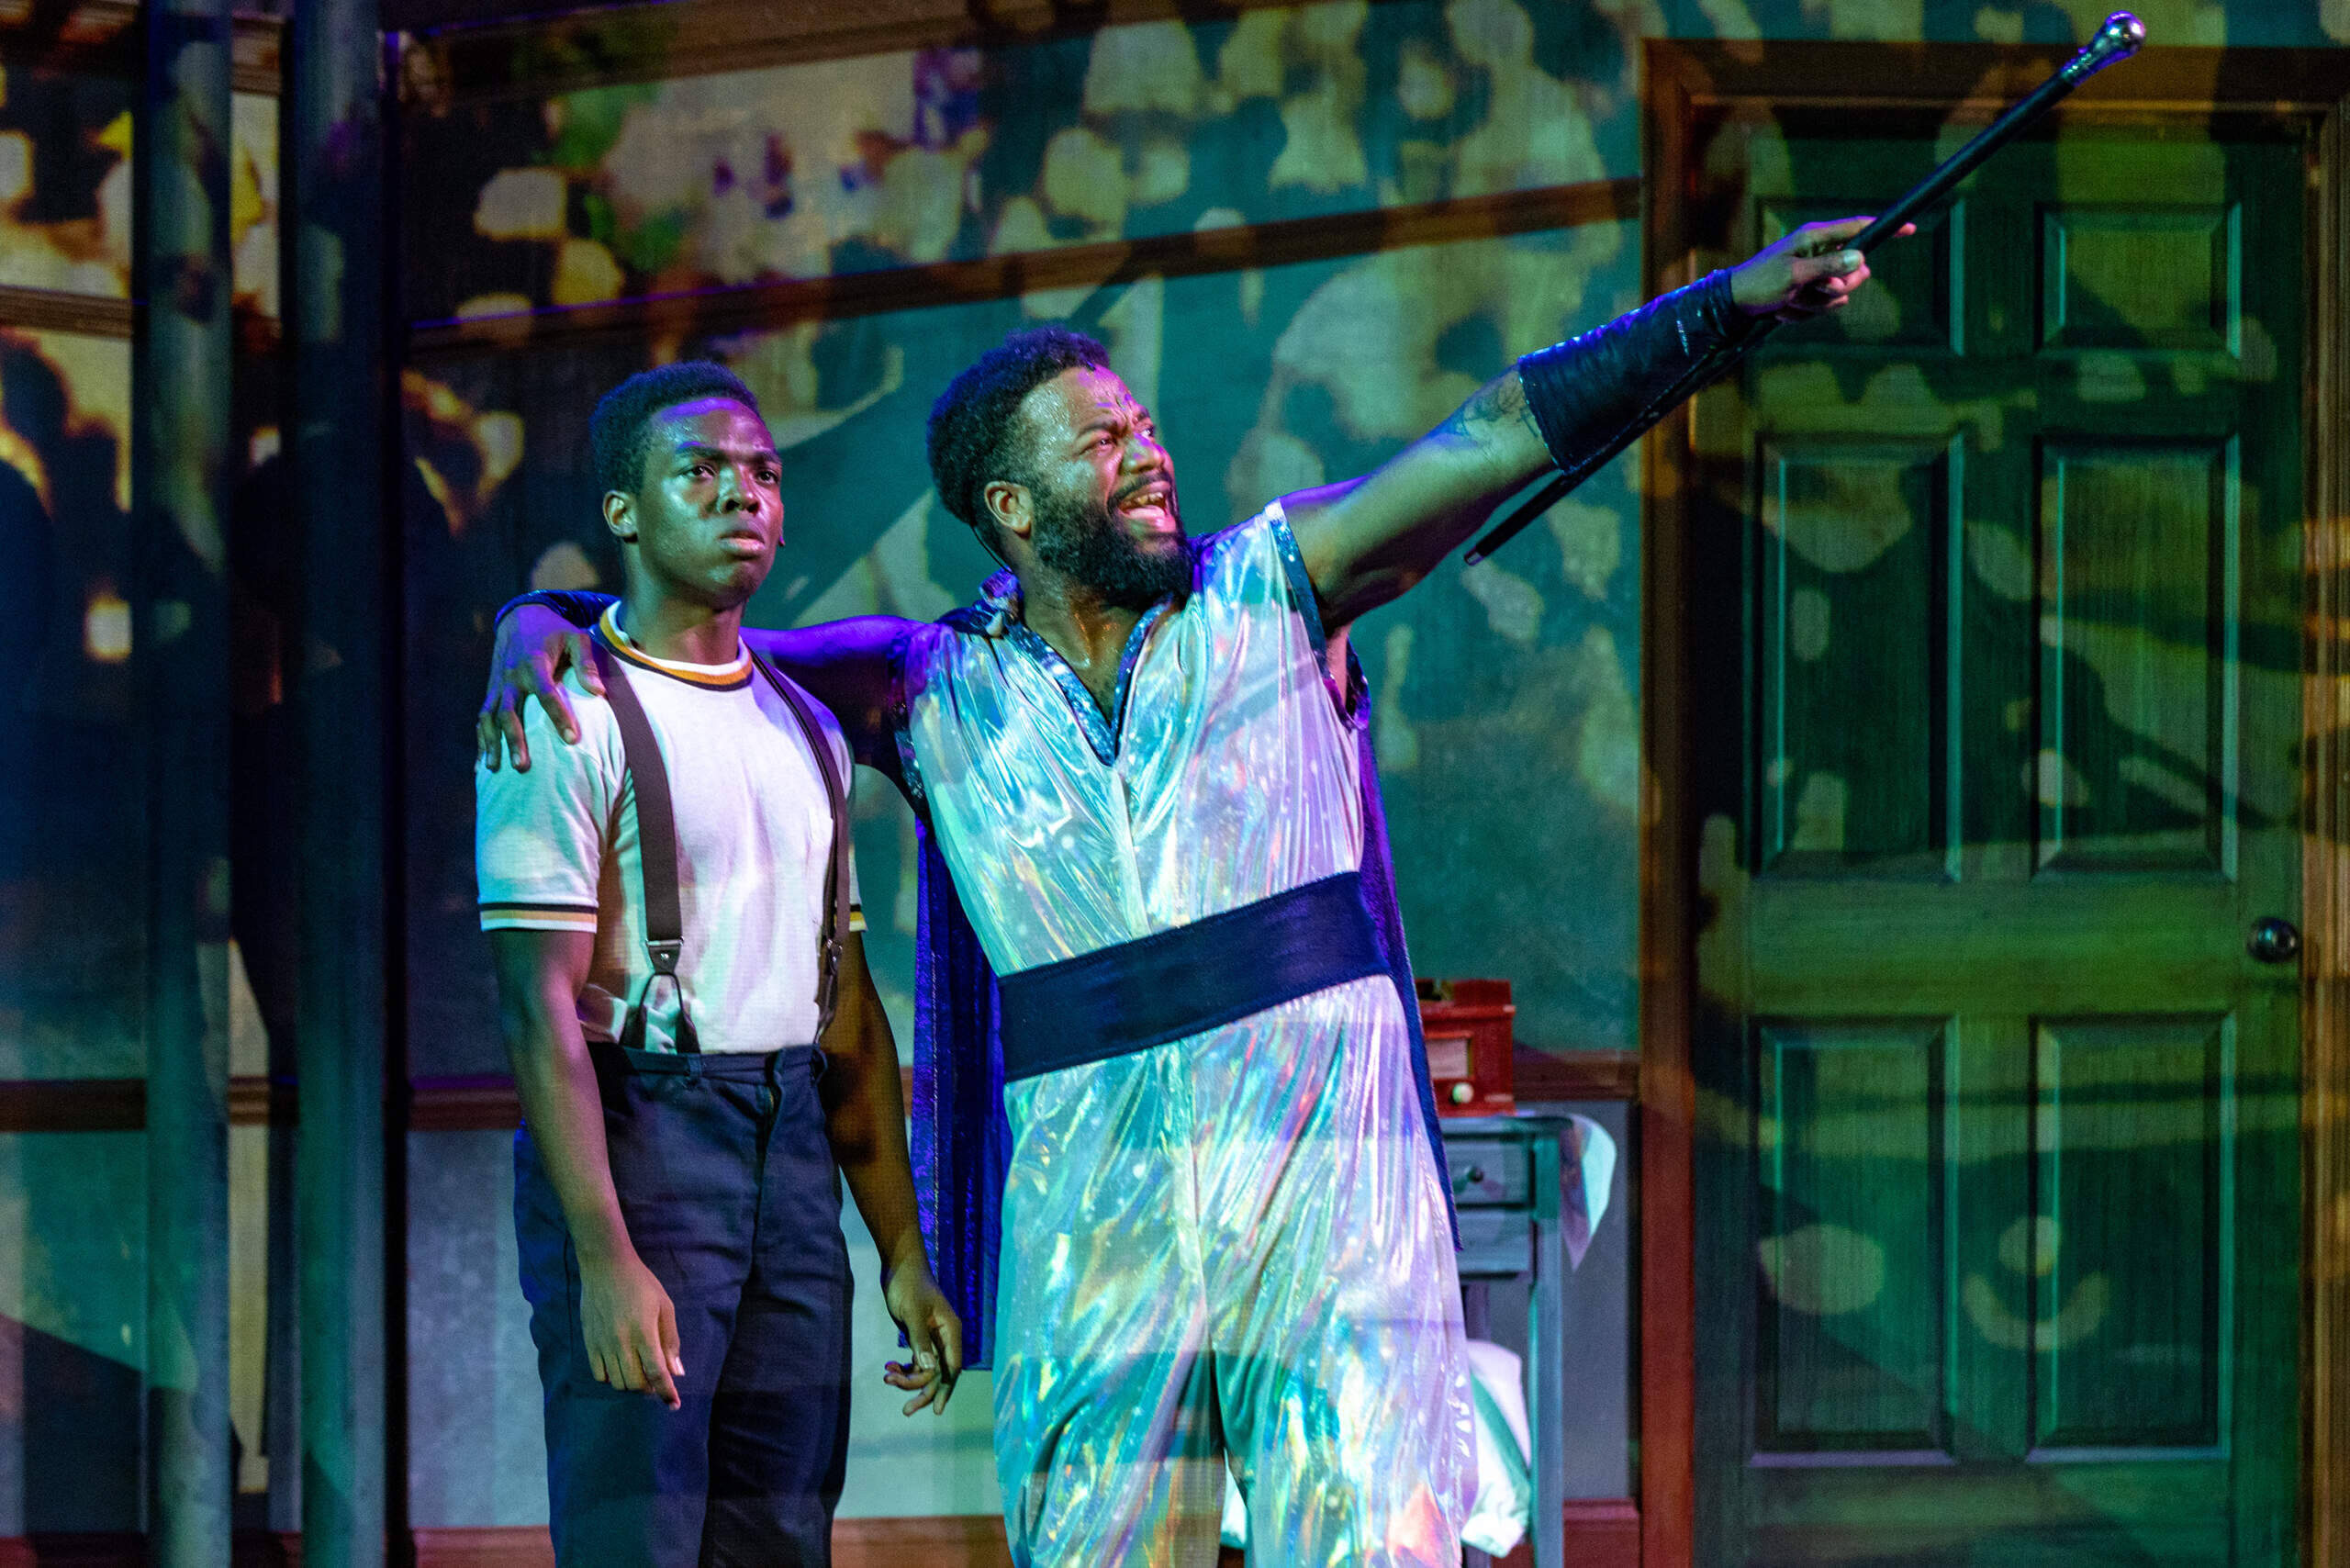 Errol Service Jr., as The Boy, and Martinez Napoleon, as J. Sonic, perform during a dress rehearsal of “The Boy Who Kissed the Sky” at the Strand Theatre. (Jesse Costa/WBUR)